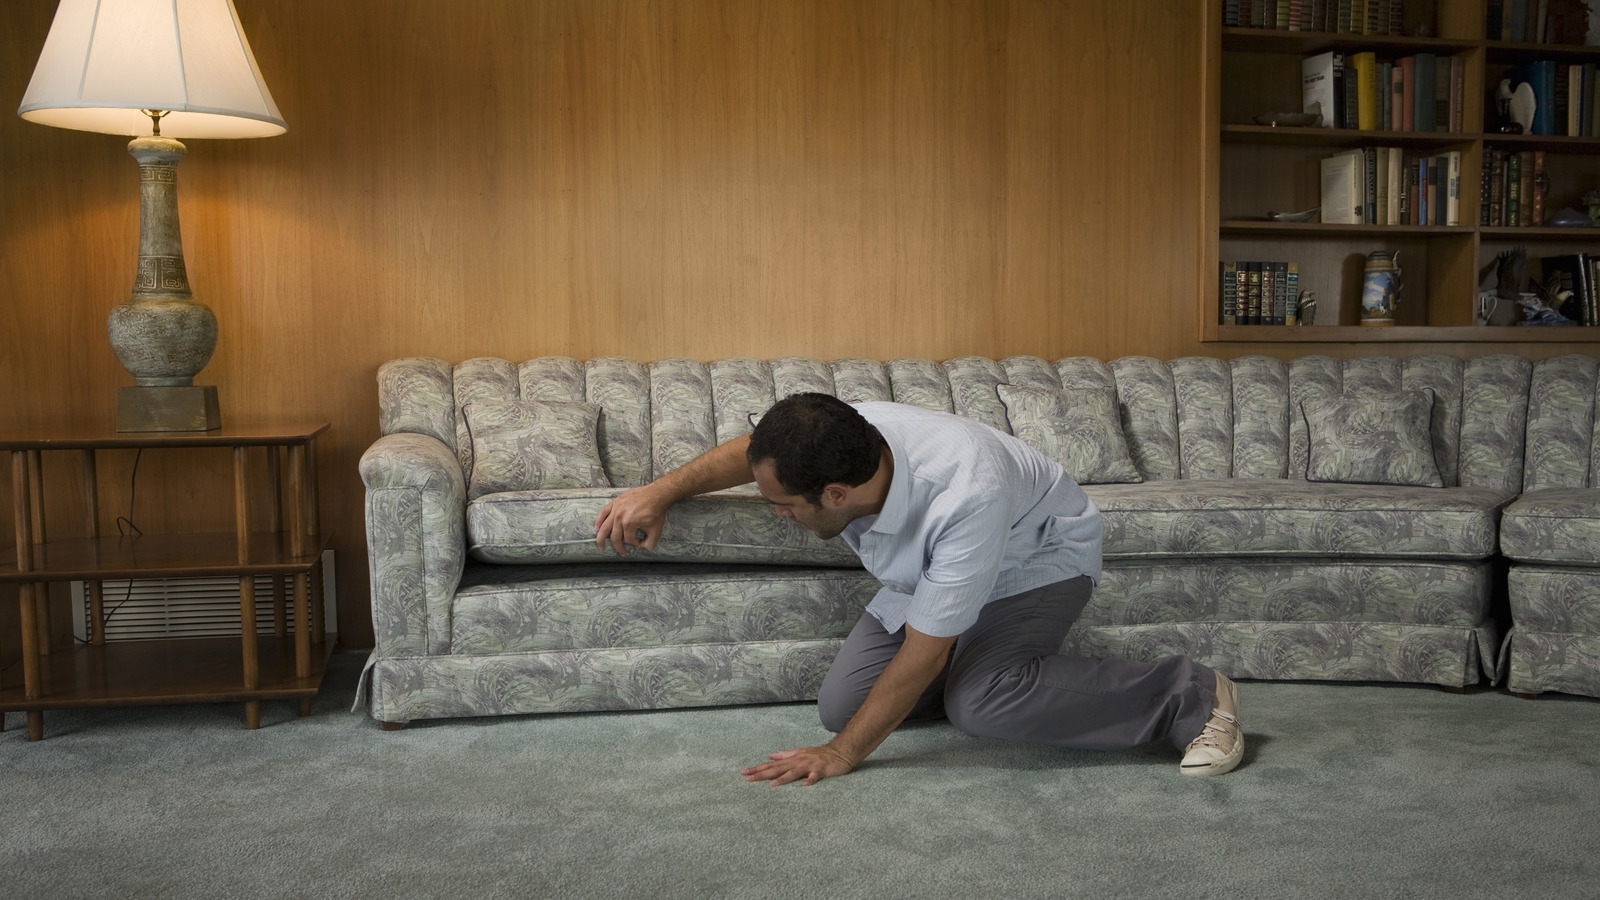 How to clean Velcro on the back of a couch cushion that has a